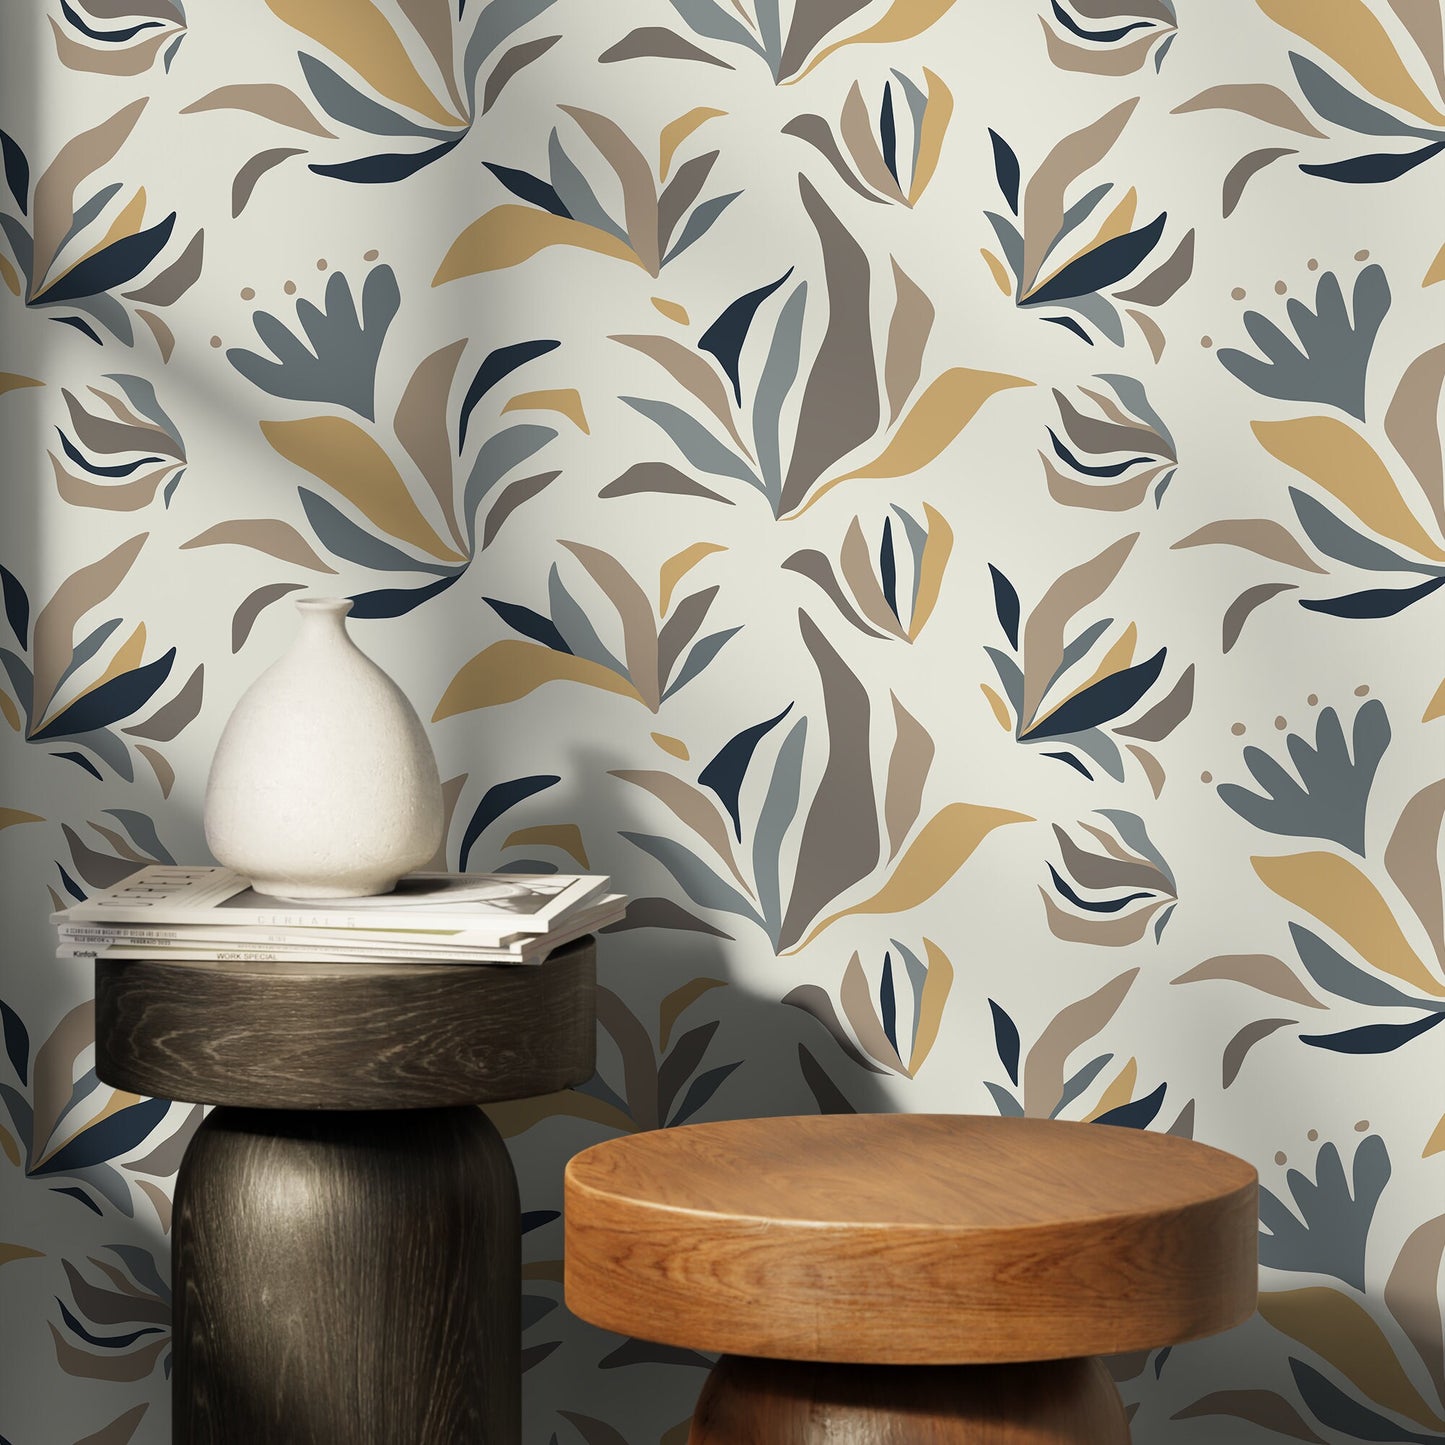 Abstract Floral and Leaf Wallpaper Modern Wallpaper Peel and Stick and Traditional Wallpaper - D725